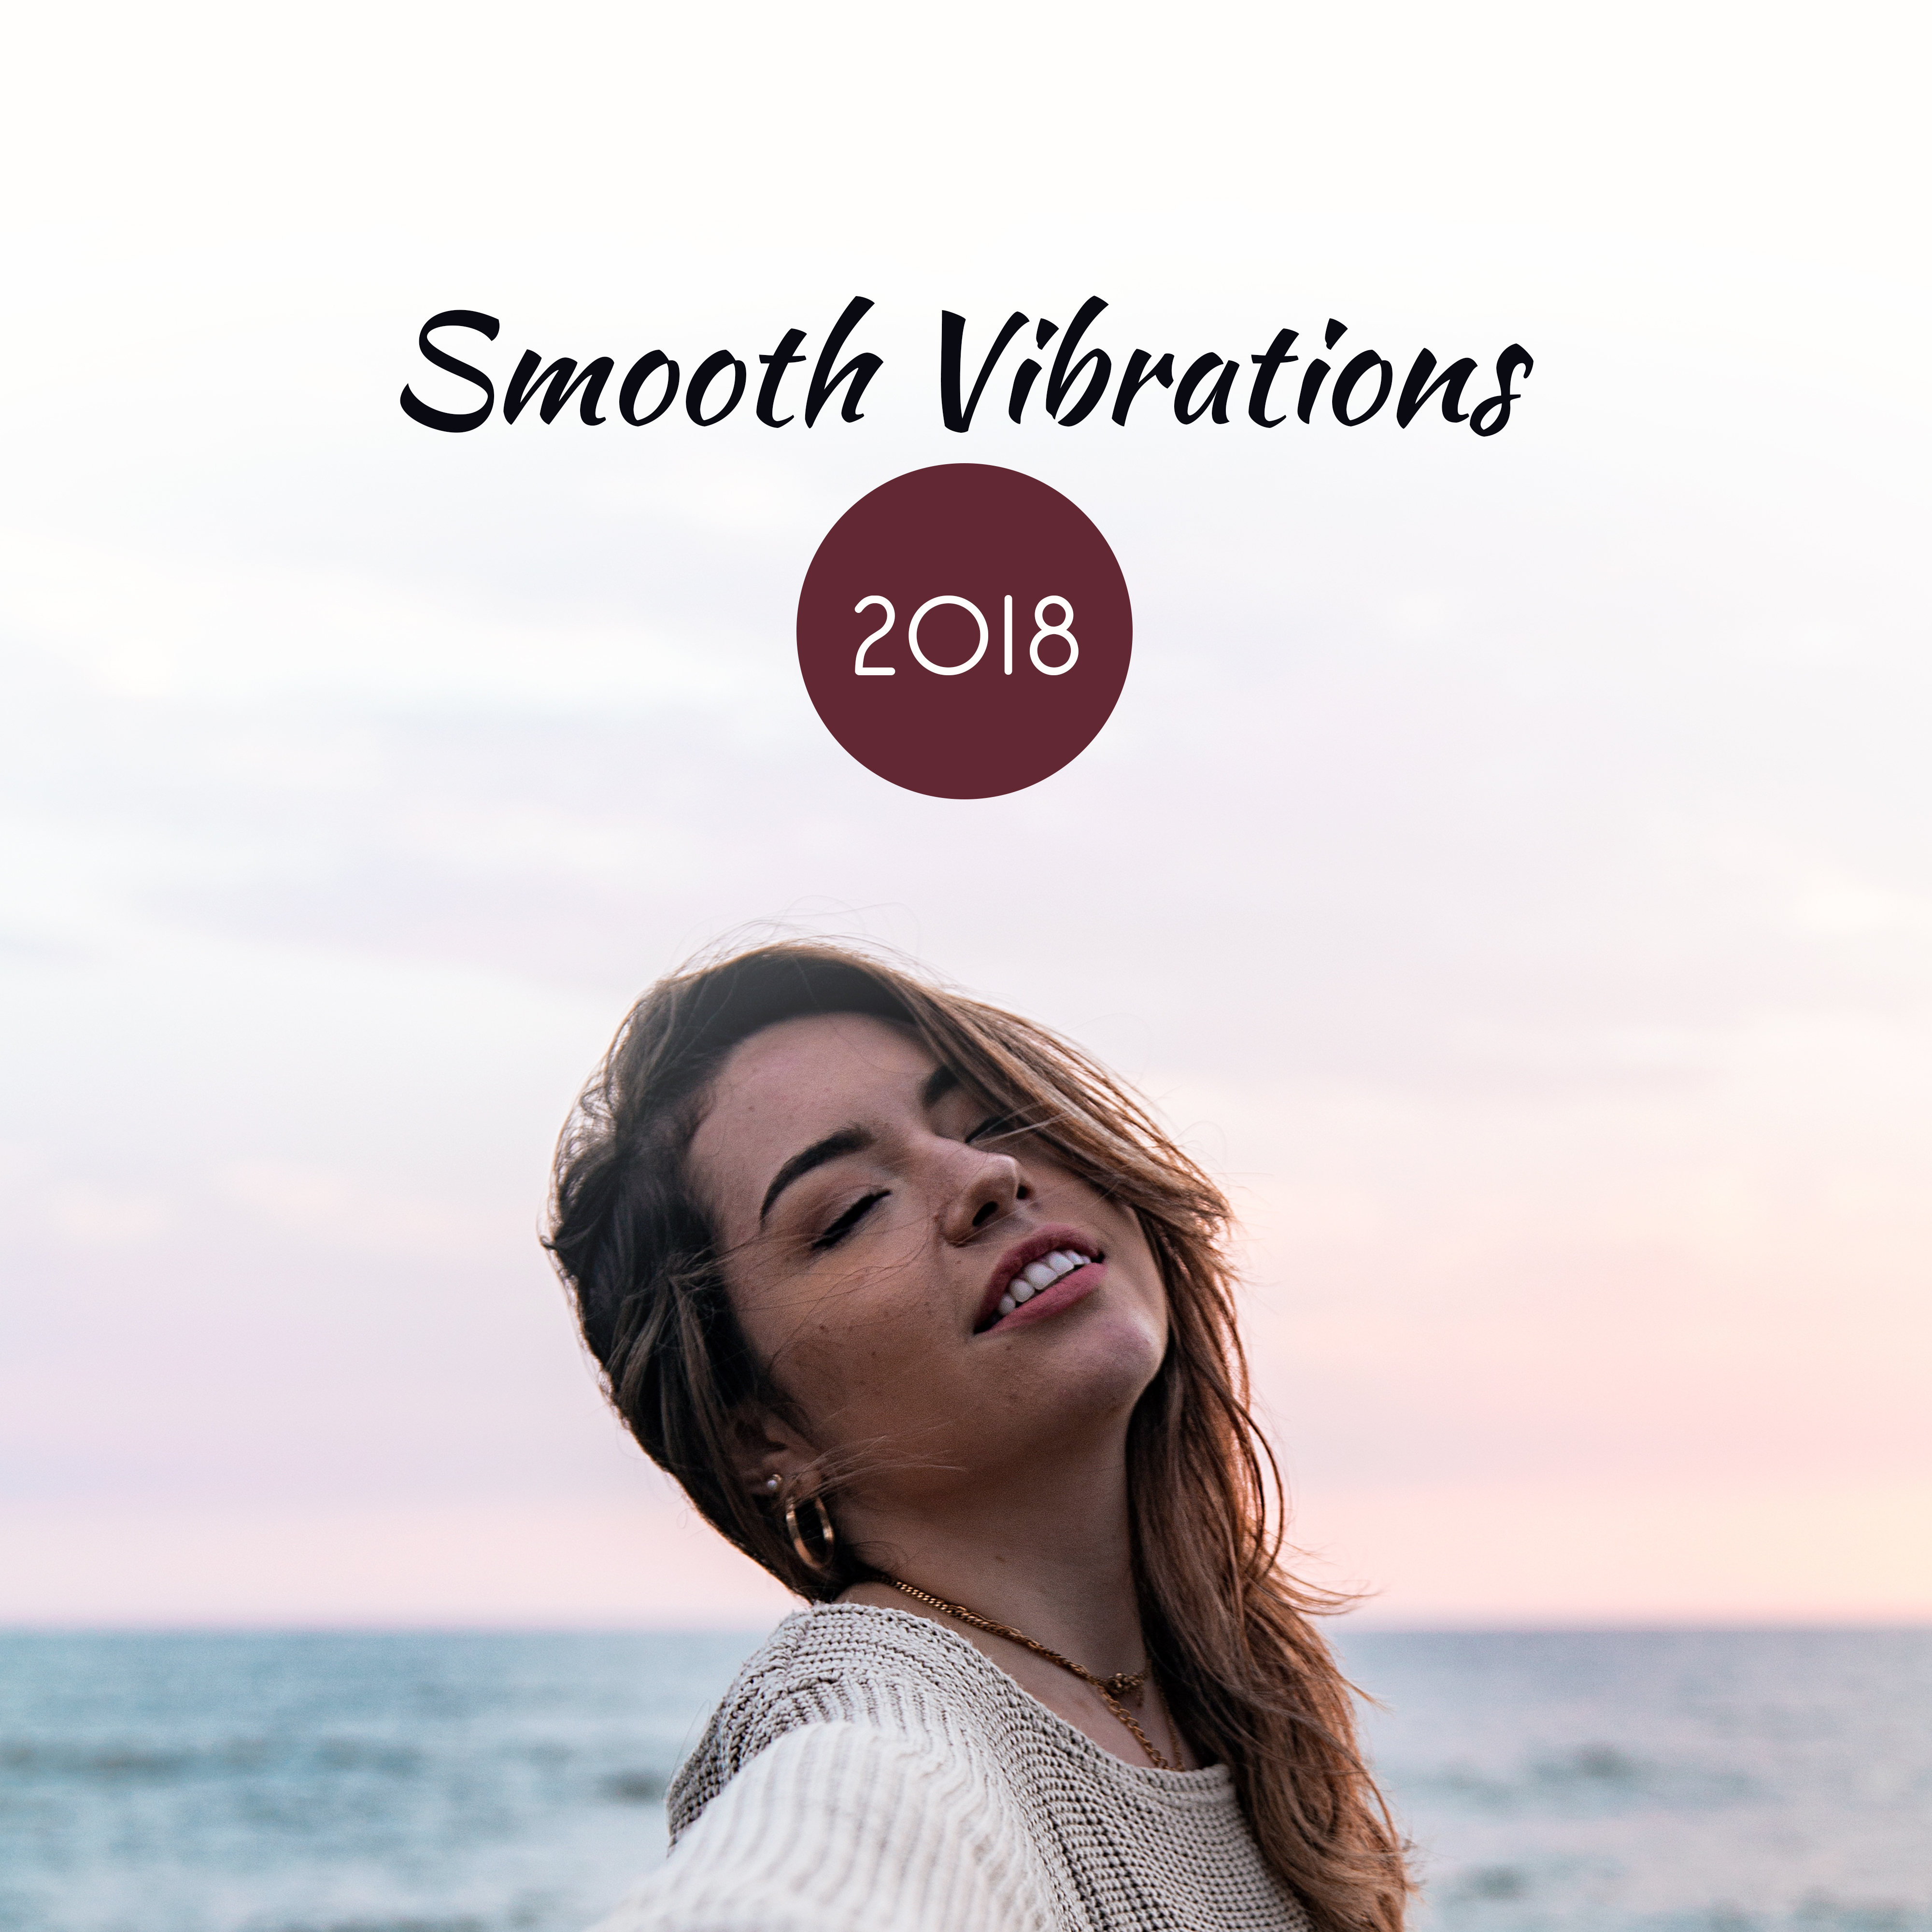 Smooth Vibrations 2018